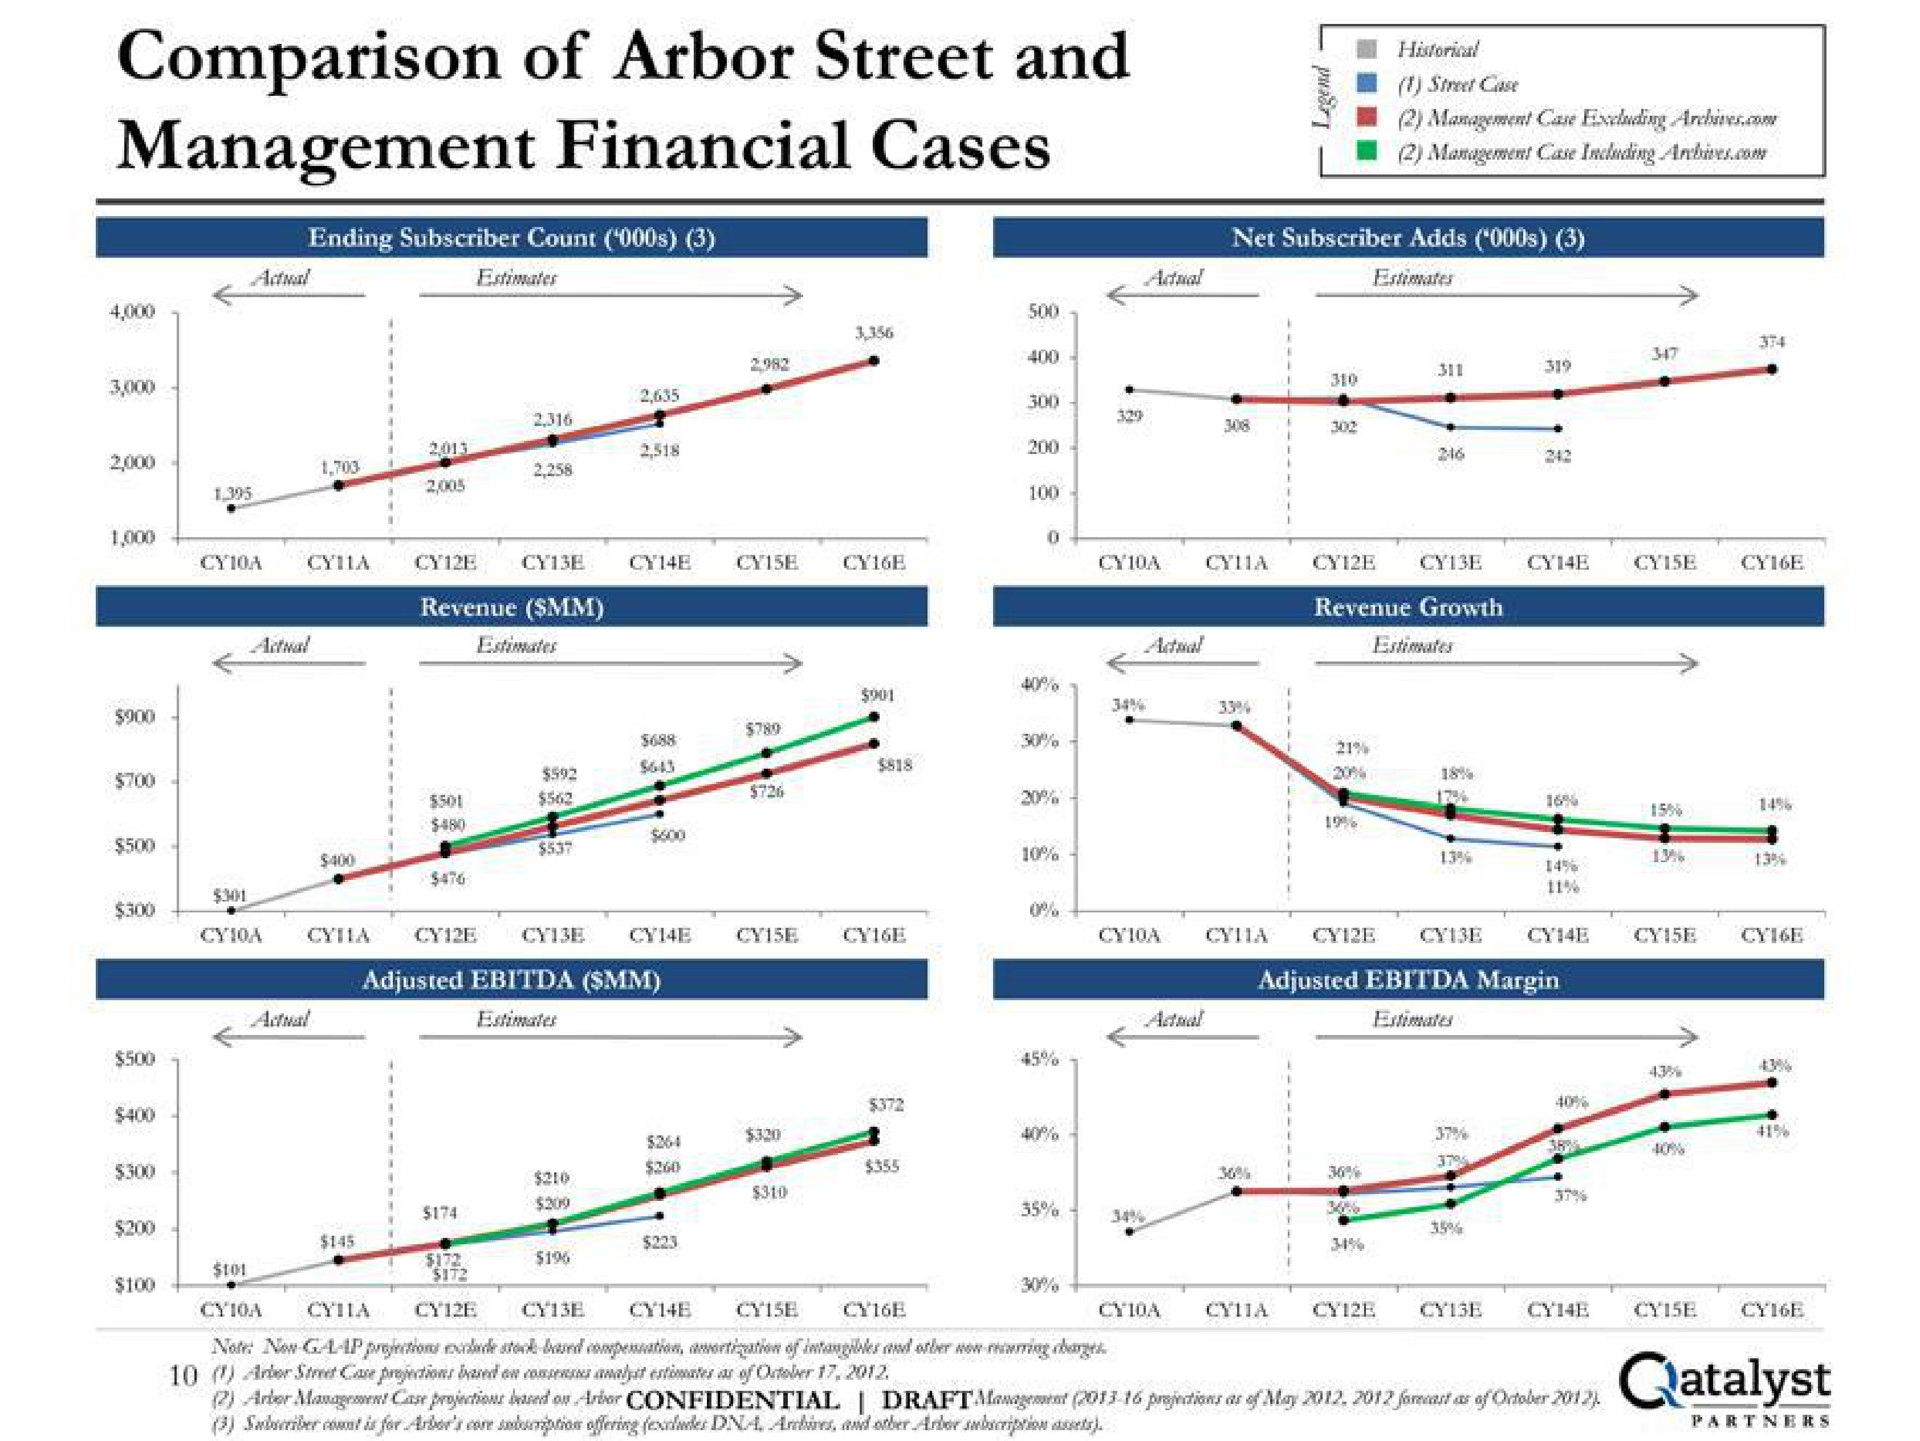 comparison of arbor street and management financial cases | Qatalyst Partners